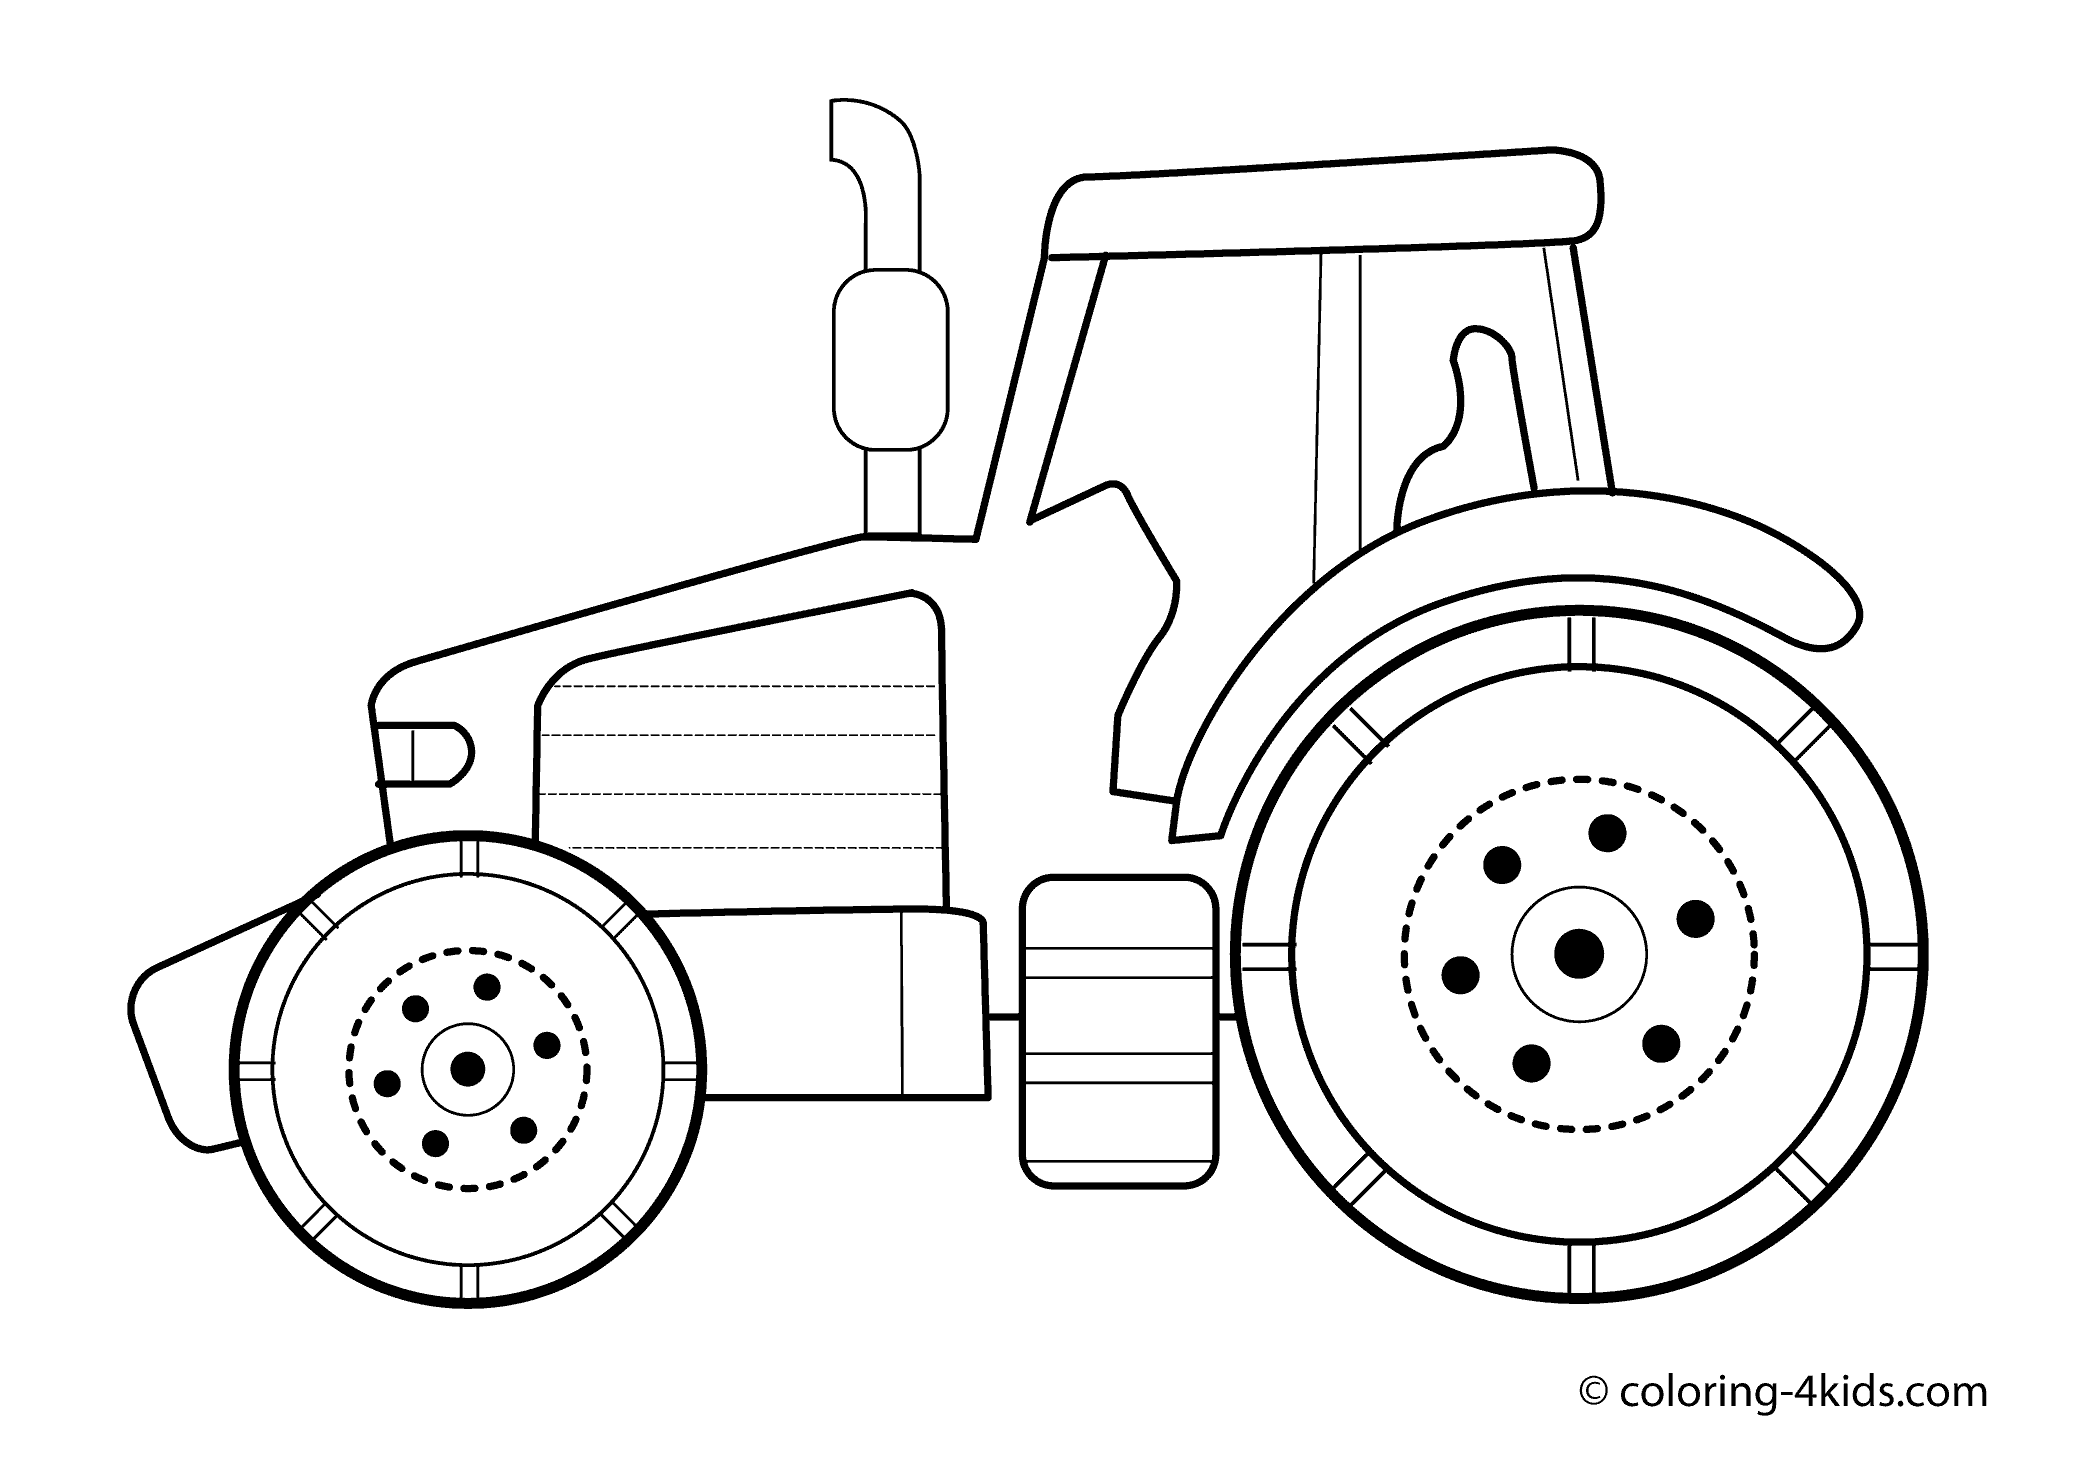 tractor coloring sheet tractor coloring pages to download and print for free tractor sheet coloring 